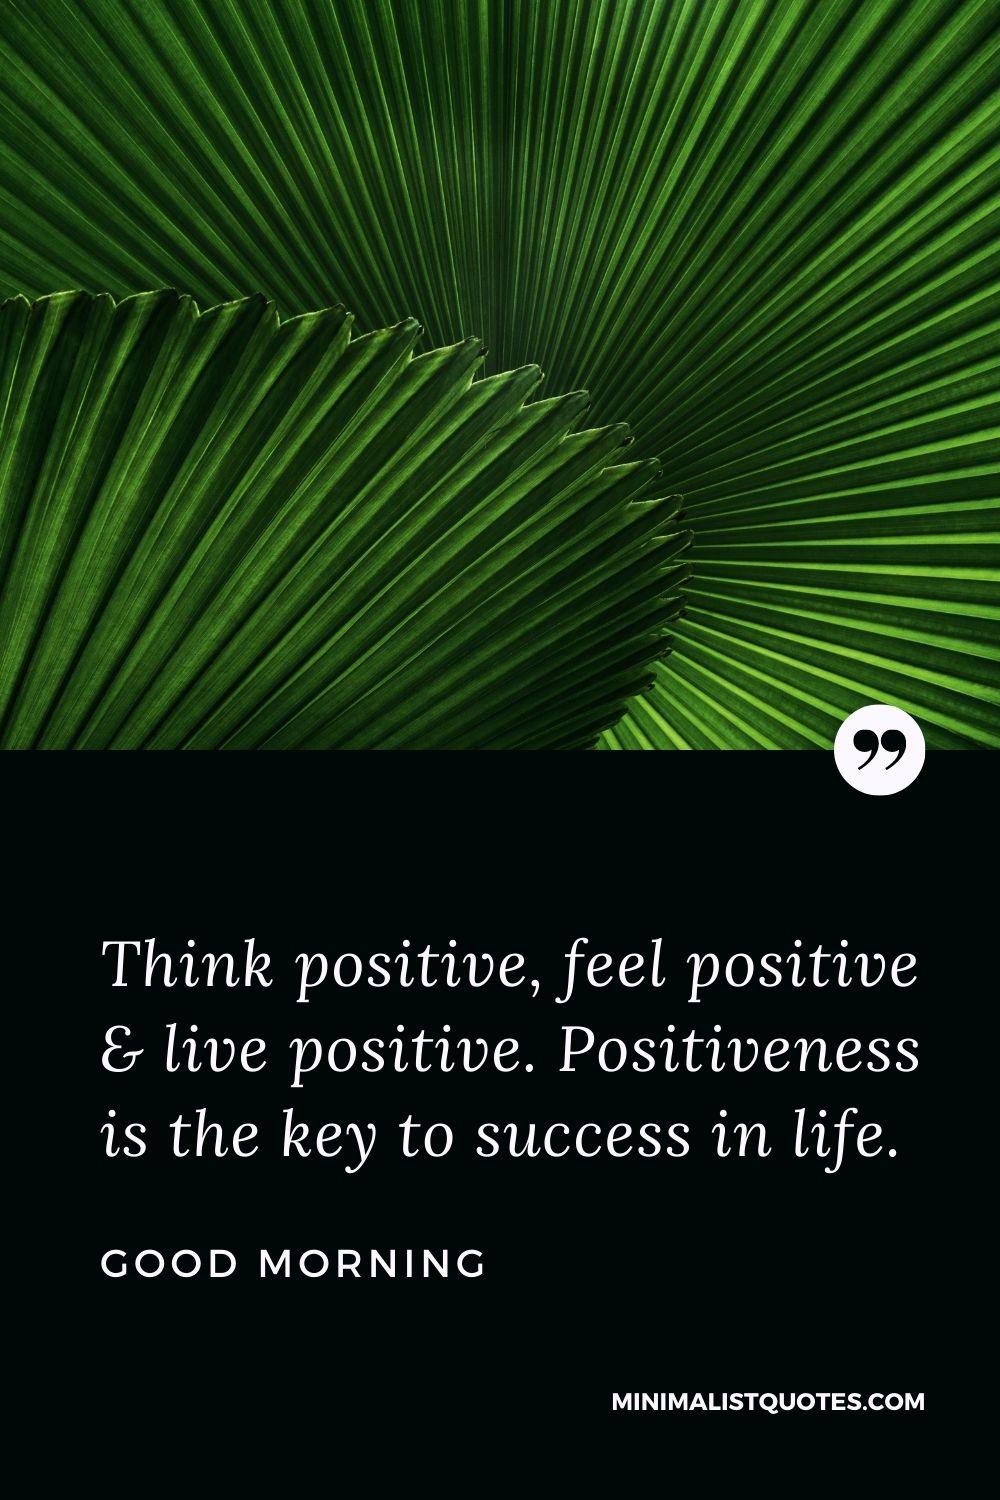 Good Morning Wish & Message With Image: Think positive, feel positive & live positive. Positiveness is the key to success in life.